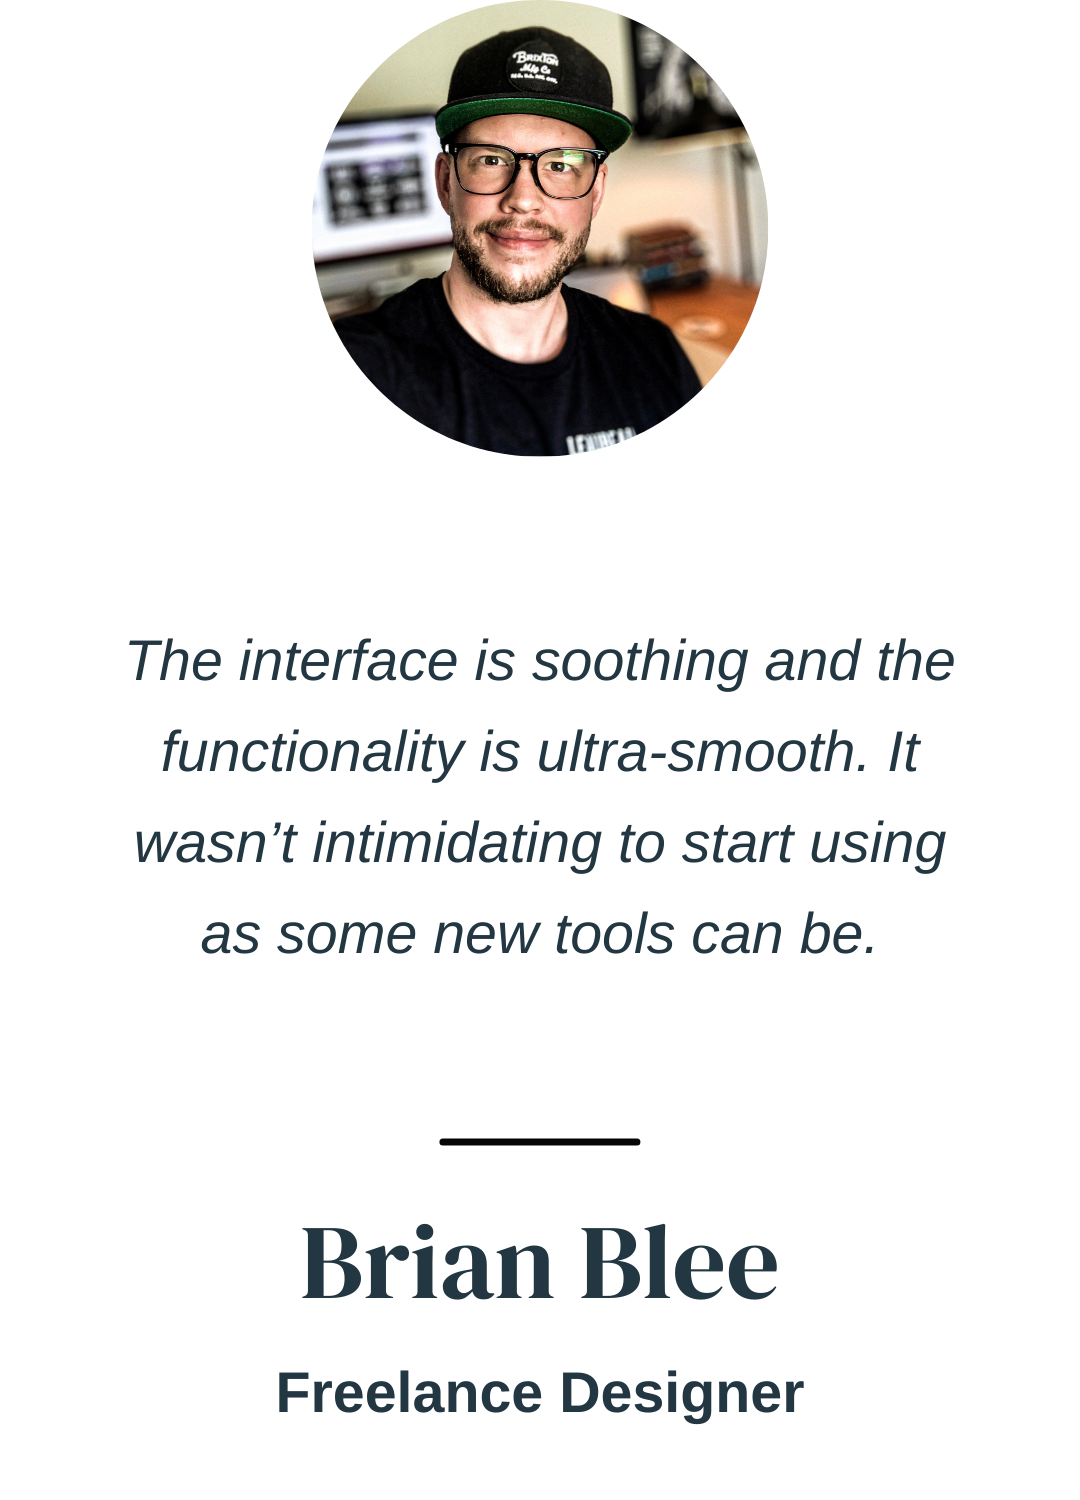 "The interface is soothing and the functionality is ultra-smooth. It wasn’t intimidating to start using as some new apps can be." Brian Blee, Freelance Designer